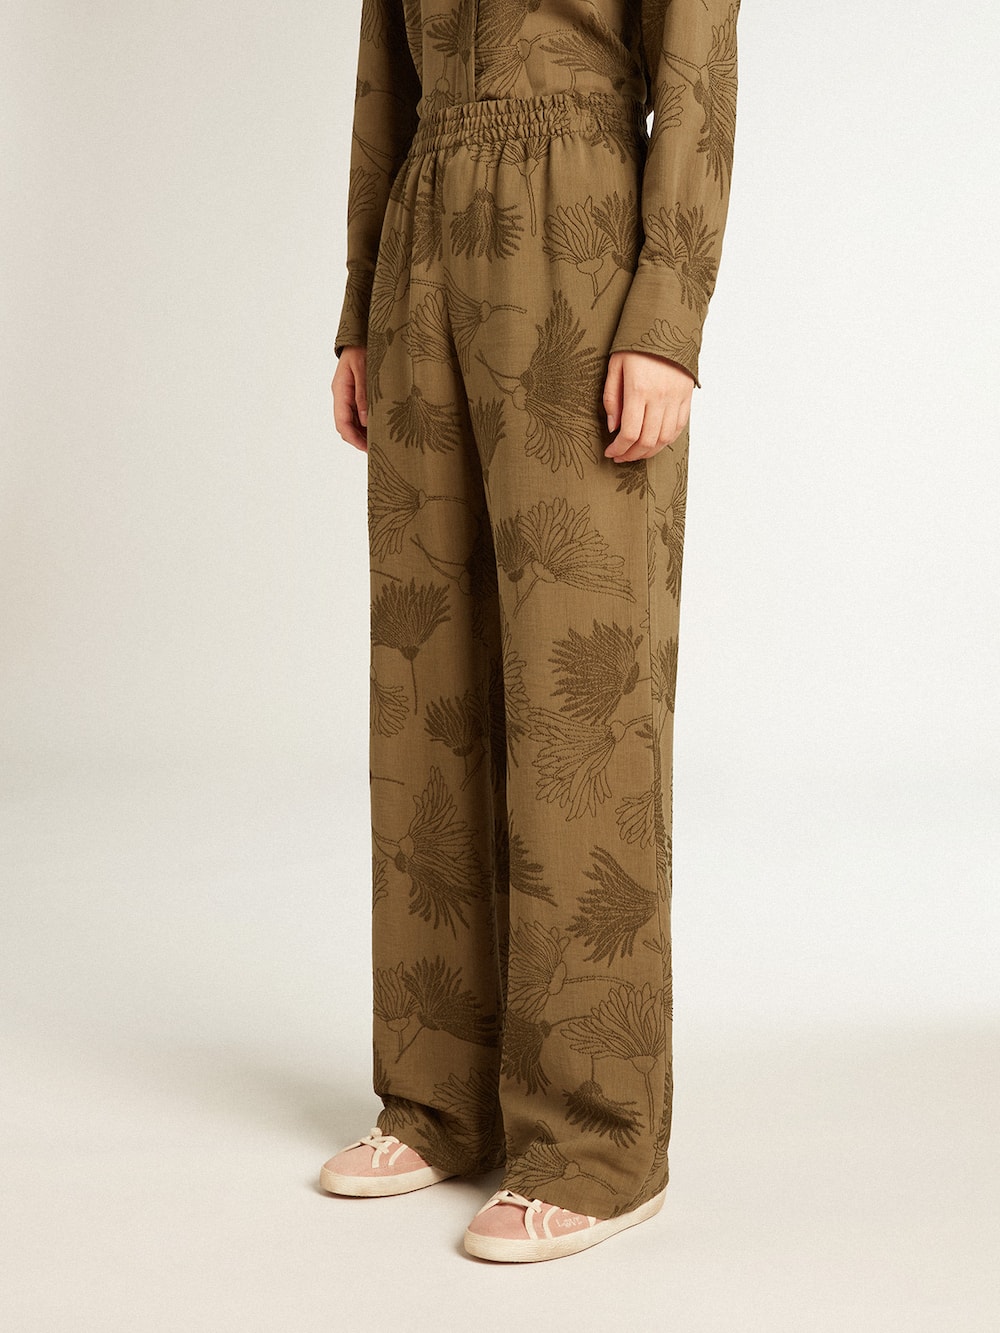 Golden Goose - Women's olive-colored viscose-cotton blend pants with floral pattern in 